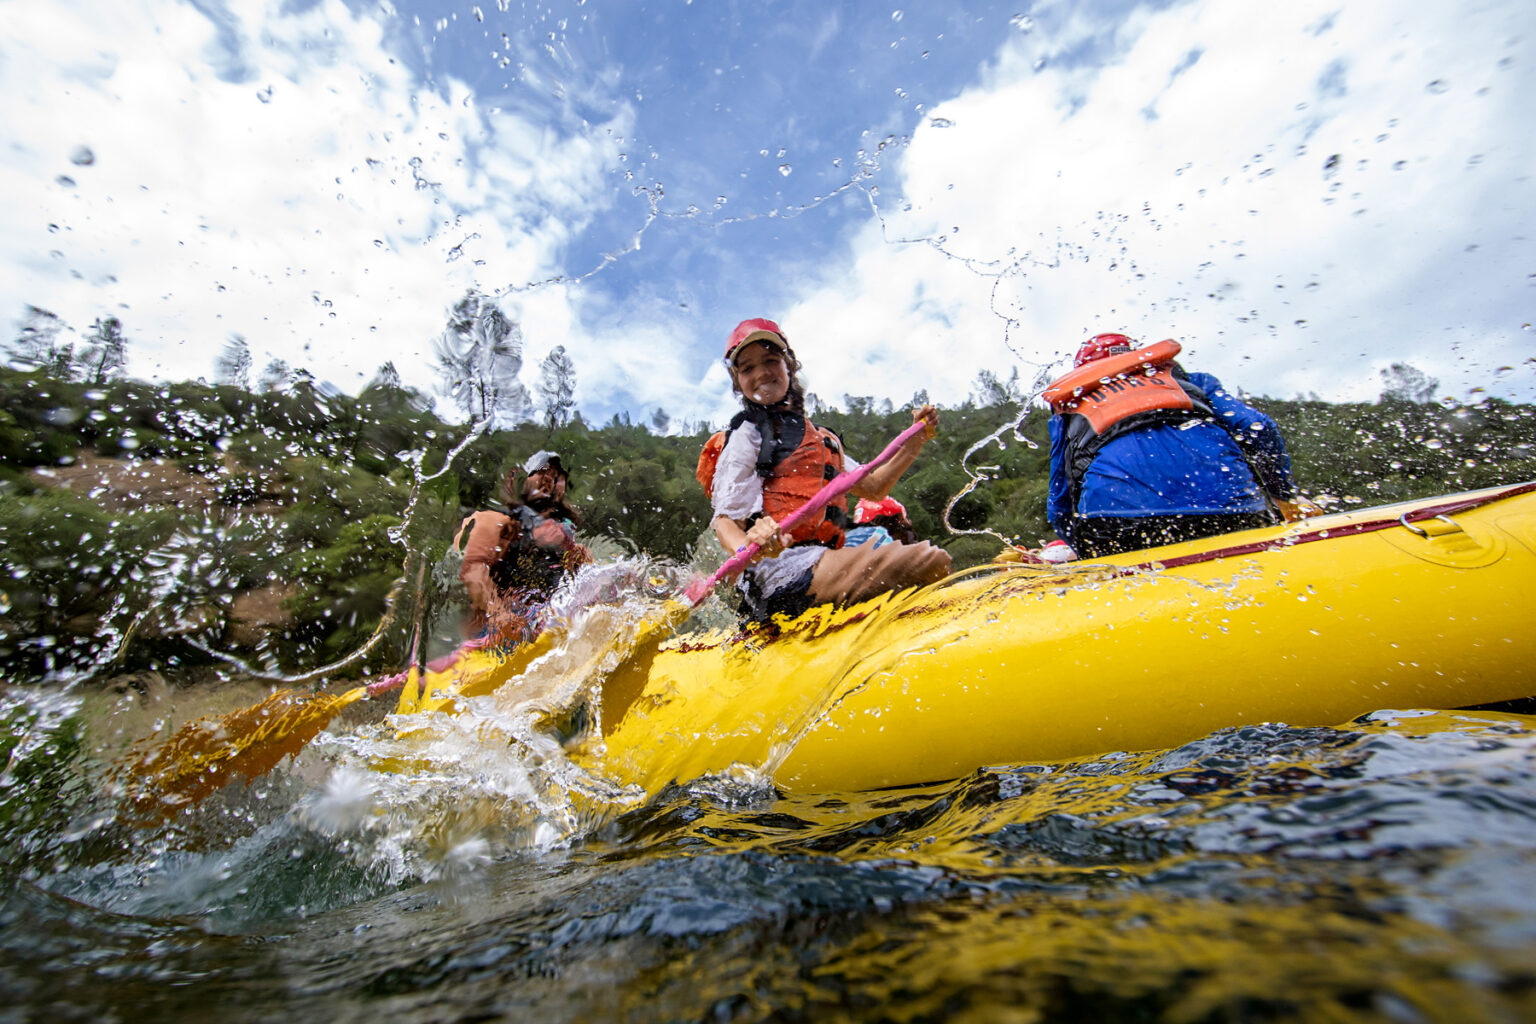 A young person splashes with a paddle during an OARS rafting trip on the South Fork of the American River.